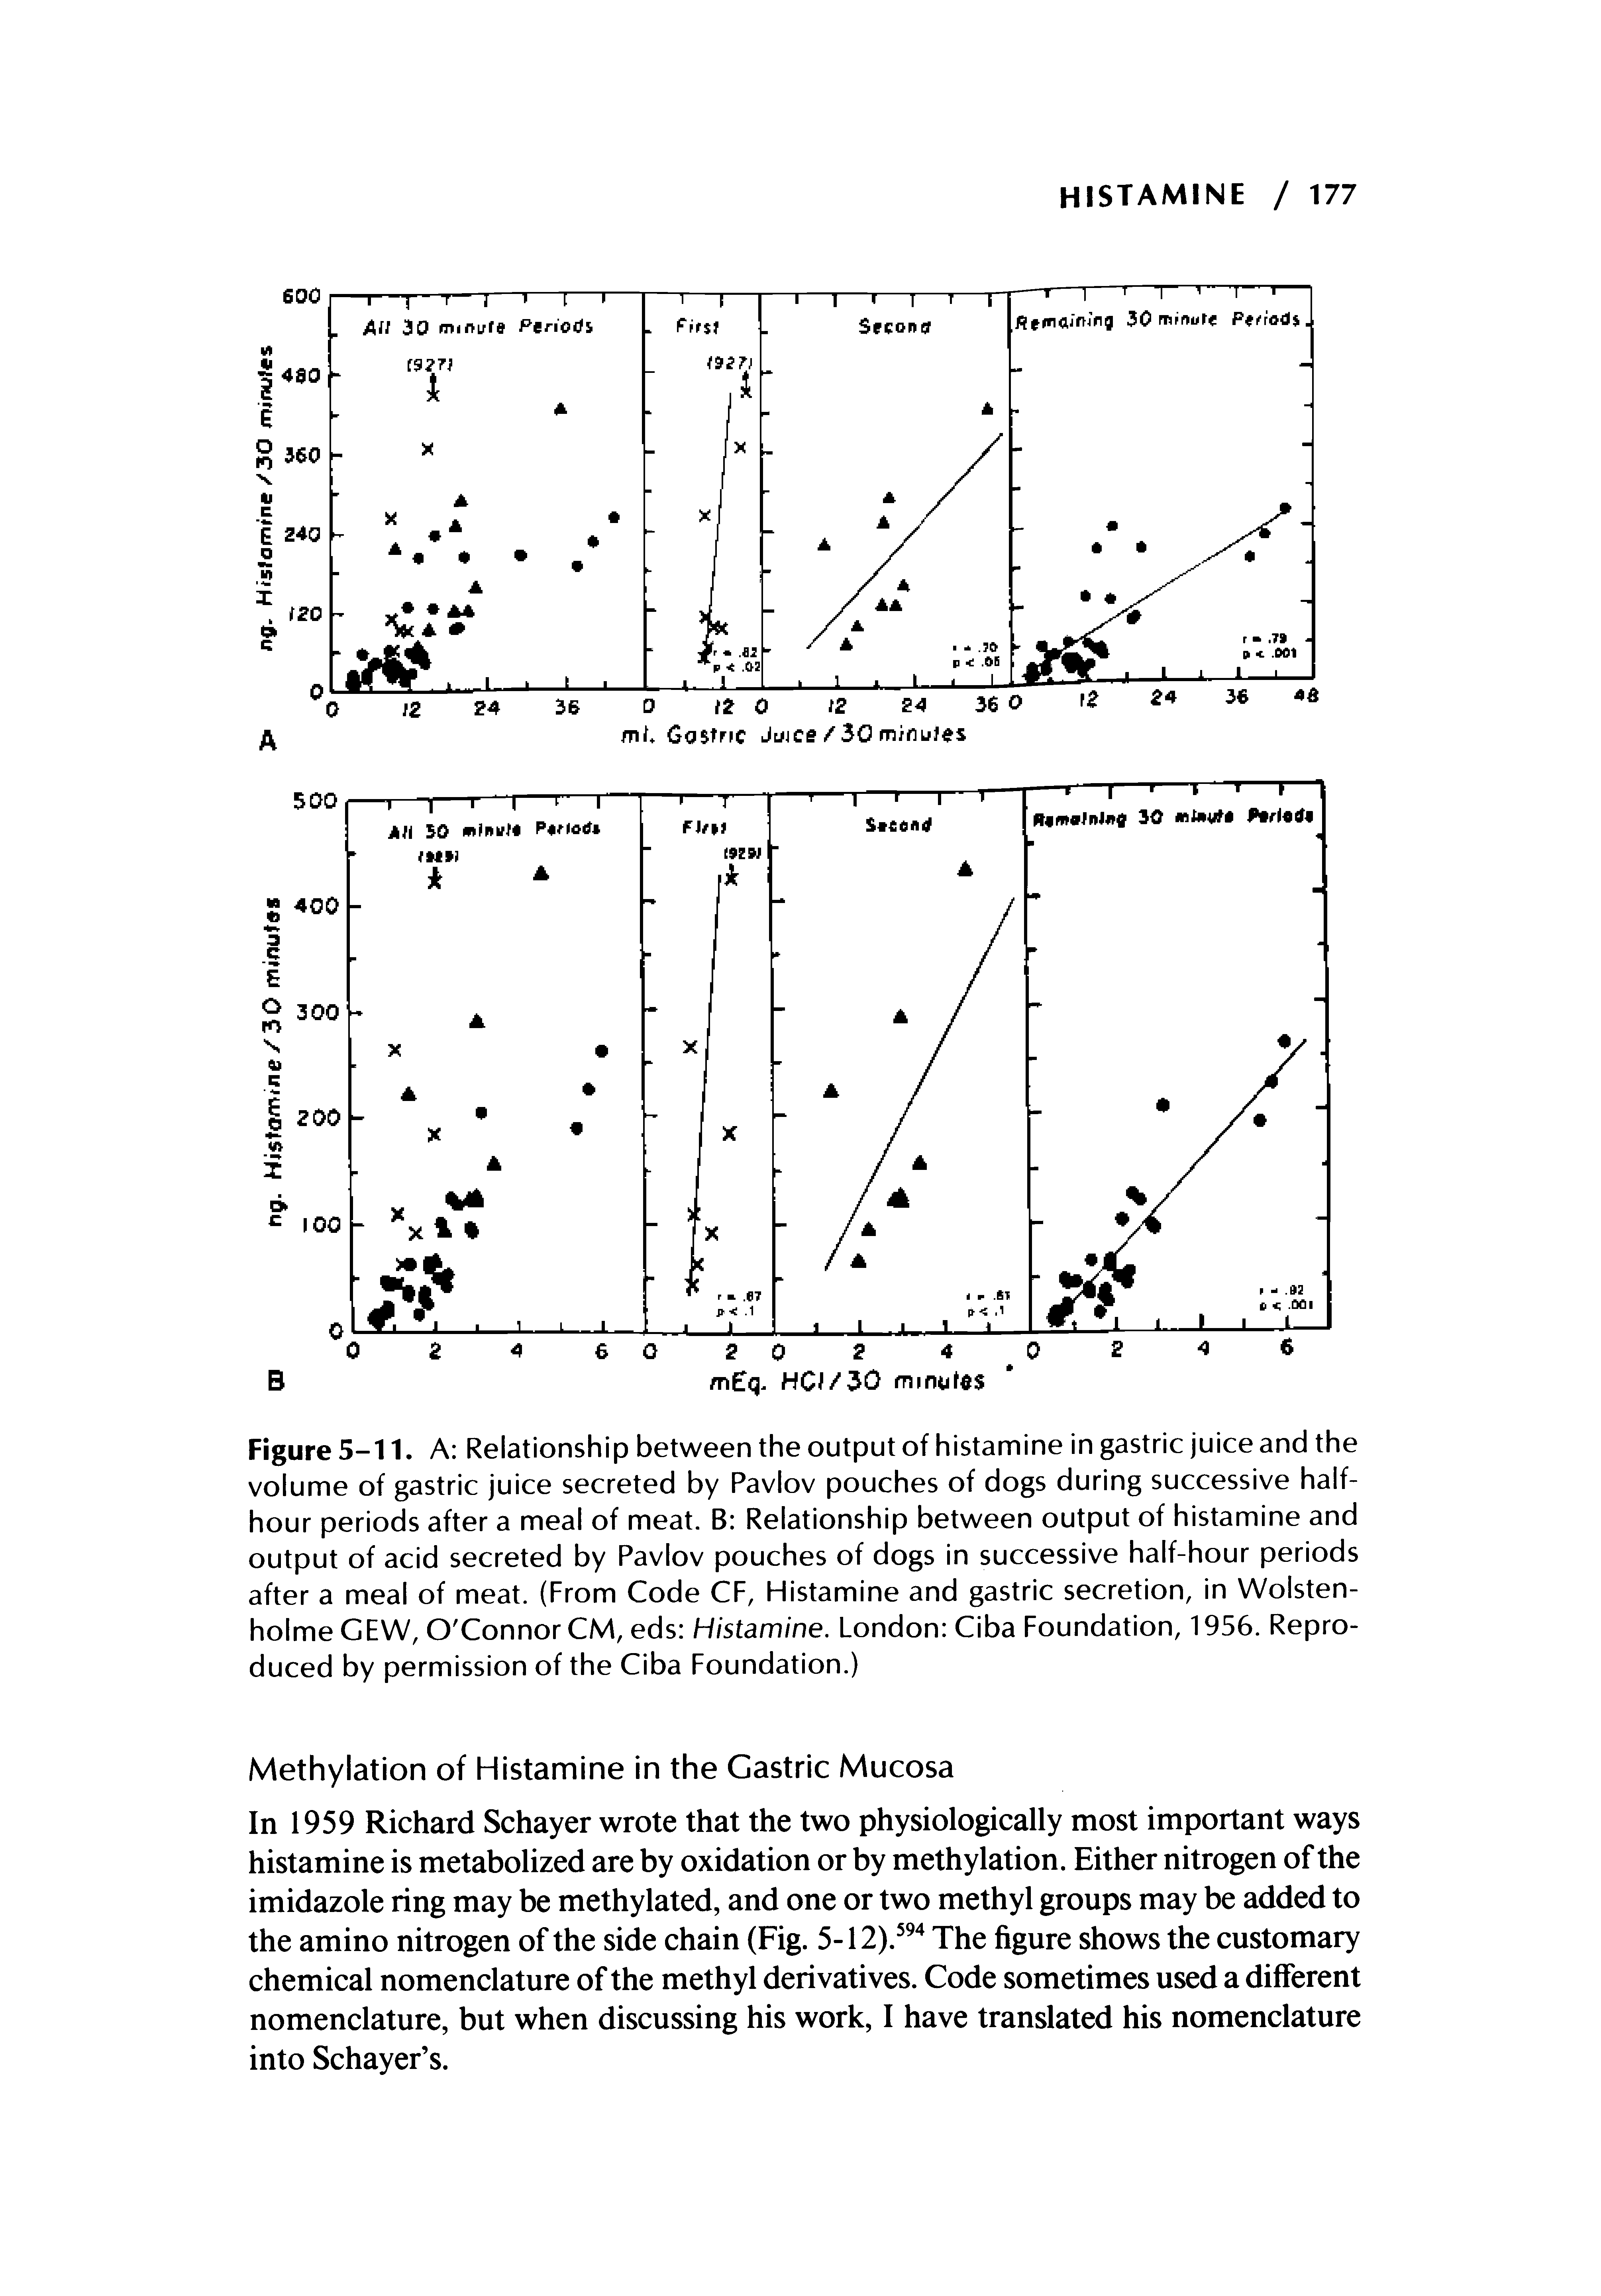 Figure 5-11. A Relationship between the output of histamine in gastric juice and the volume of gastric juice secreted by Pavlov pouches of dogs during successive half-hour periods after a meal of meat. B Relationship between output of histamine and output of acid secreted by Pavlov pouches of dogs in successive half-hour periods after a meal of meat. (From Code CF, Histamine and gastric secretion, in Wolsten-holme GEW, O Connor CM, eds Histamine. London Ciba Foundation, 1956. Reproduced by permission of the Ciba Foundation.)...